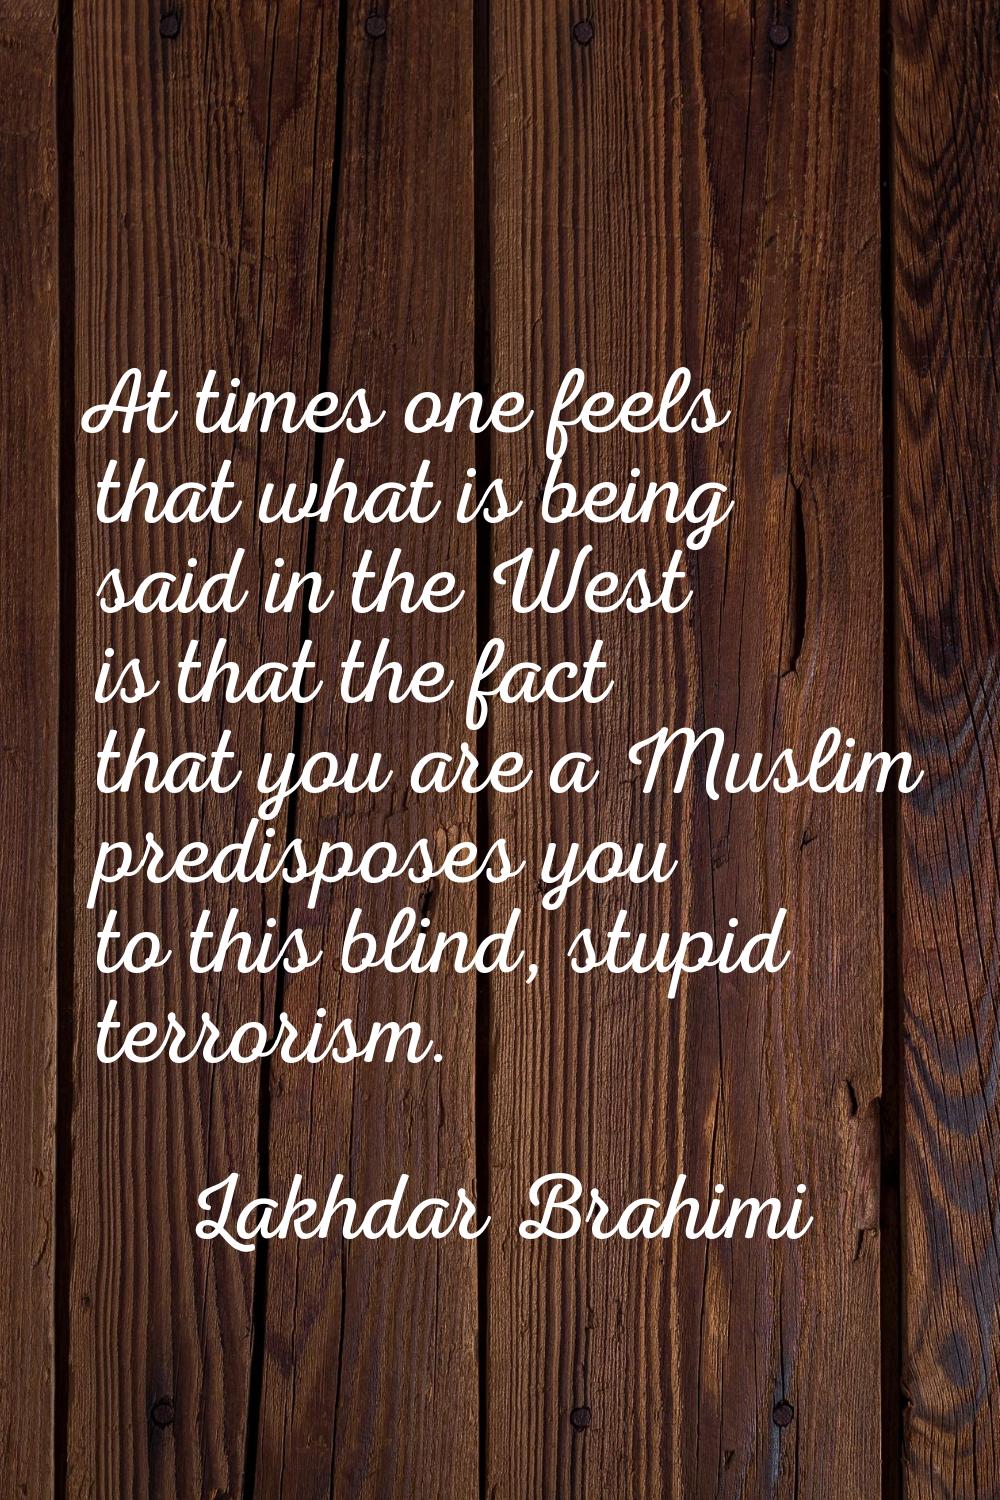 At times one feels that what is being said in the West is that the fact that you are a Muslim predi